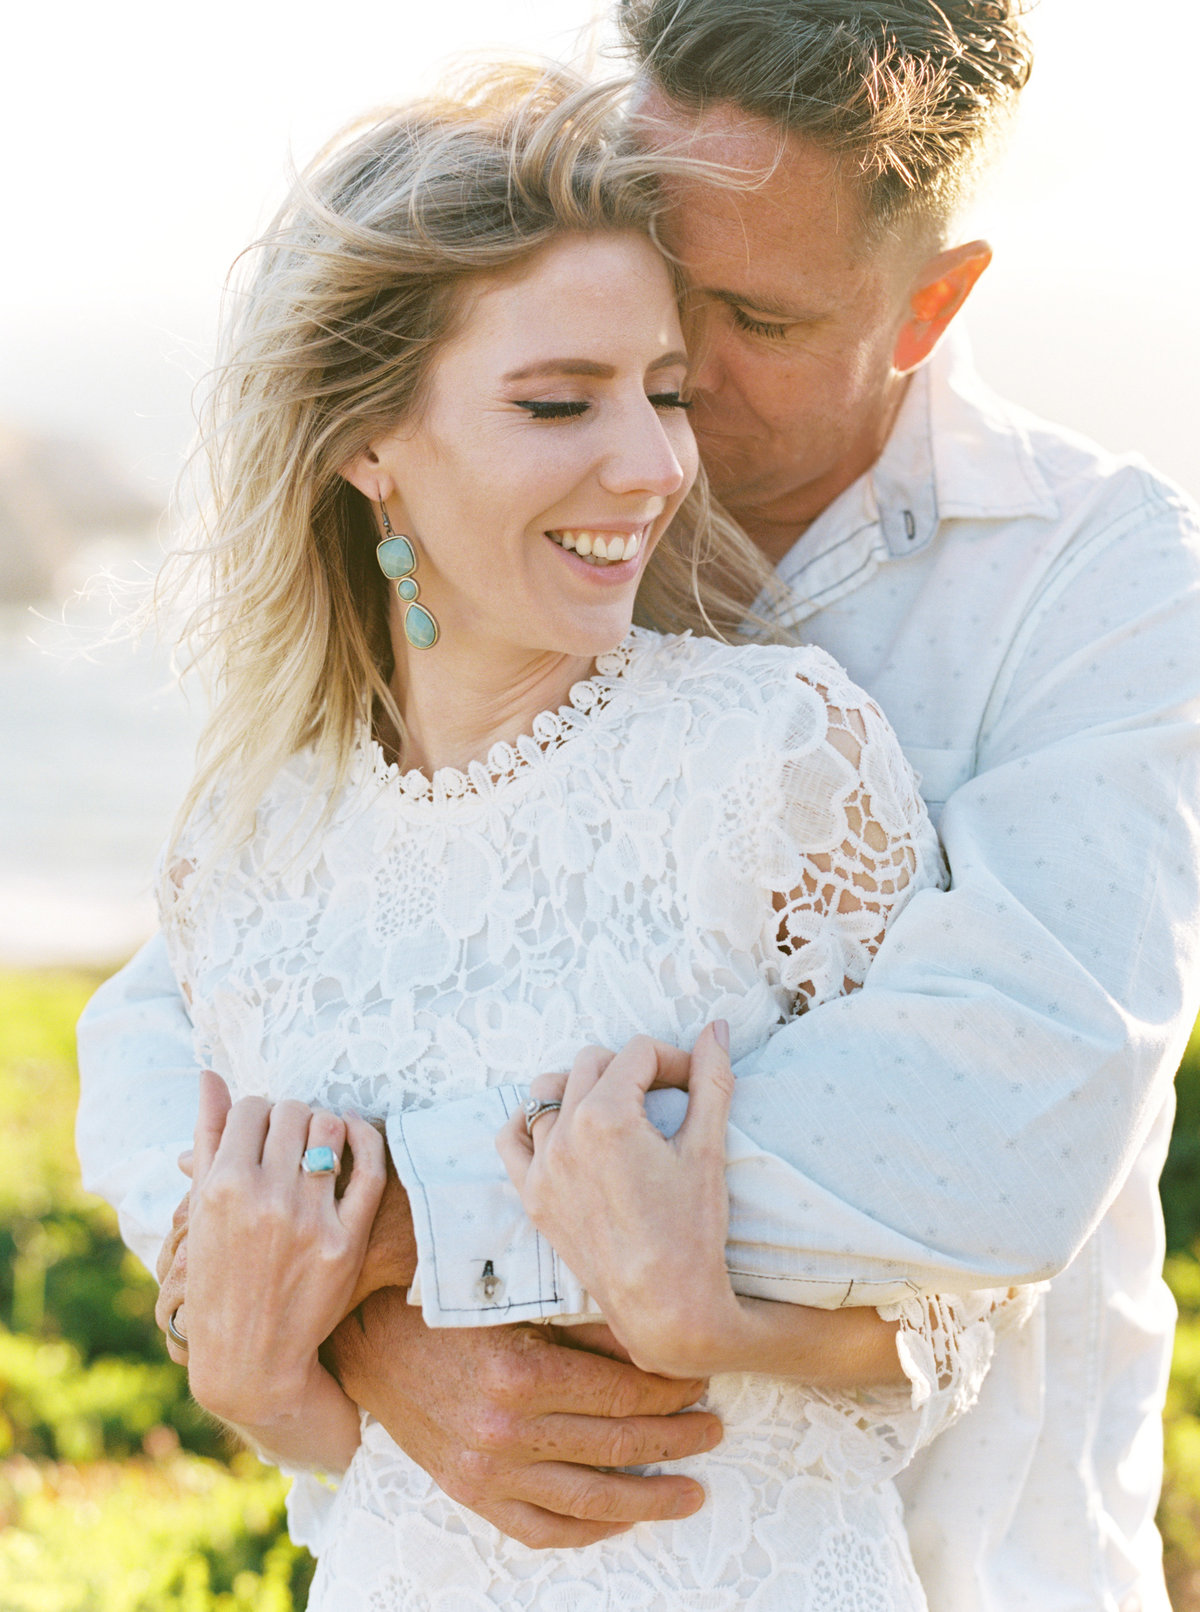 Rodeo Lagoon Mill Valley Couples Session - Cassie Valente Photography 0023